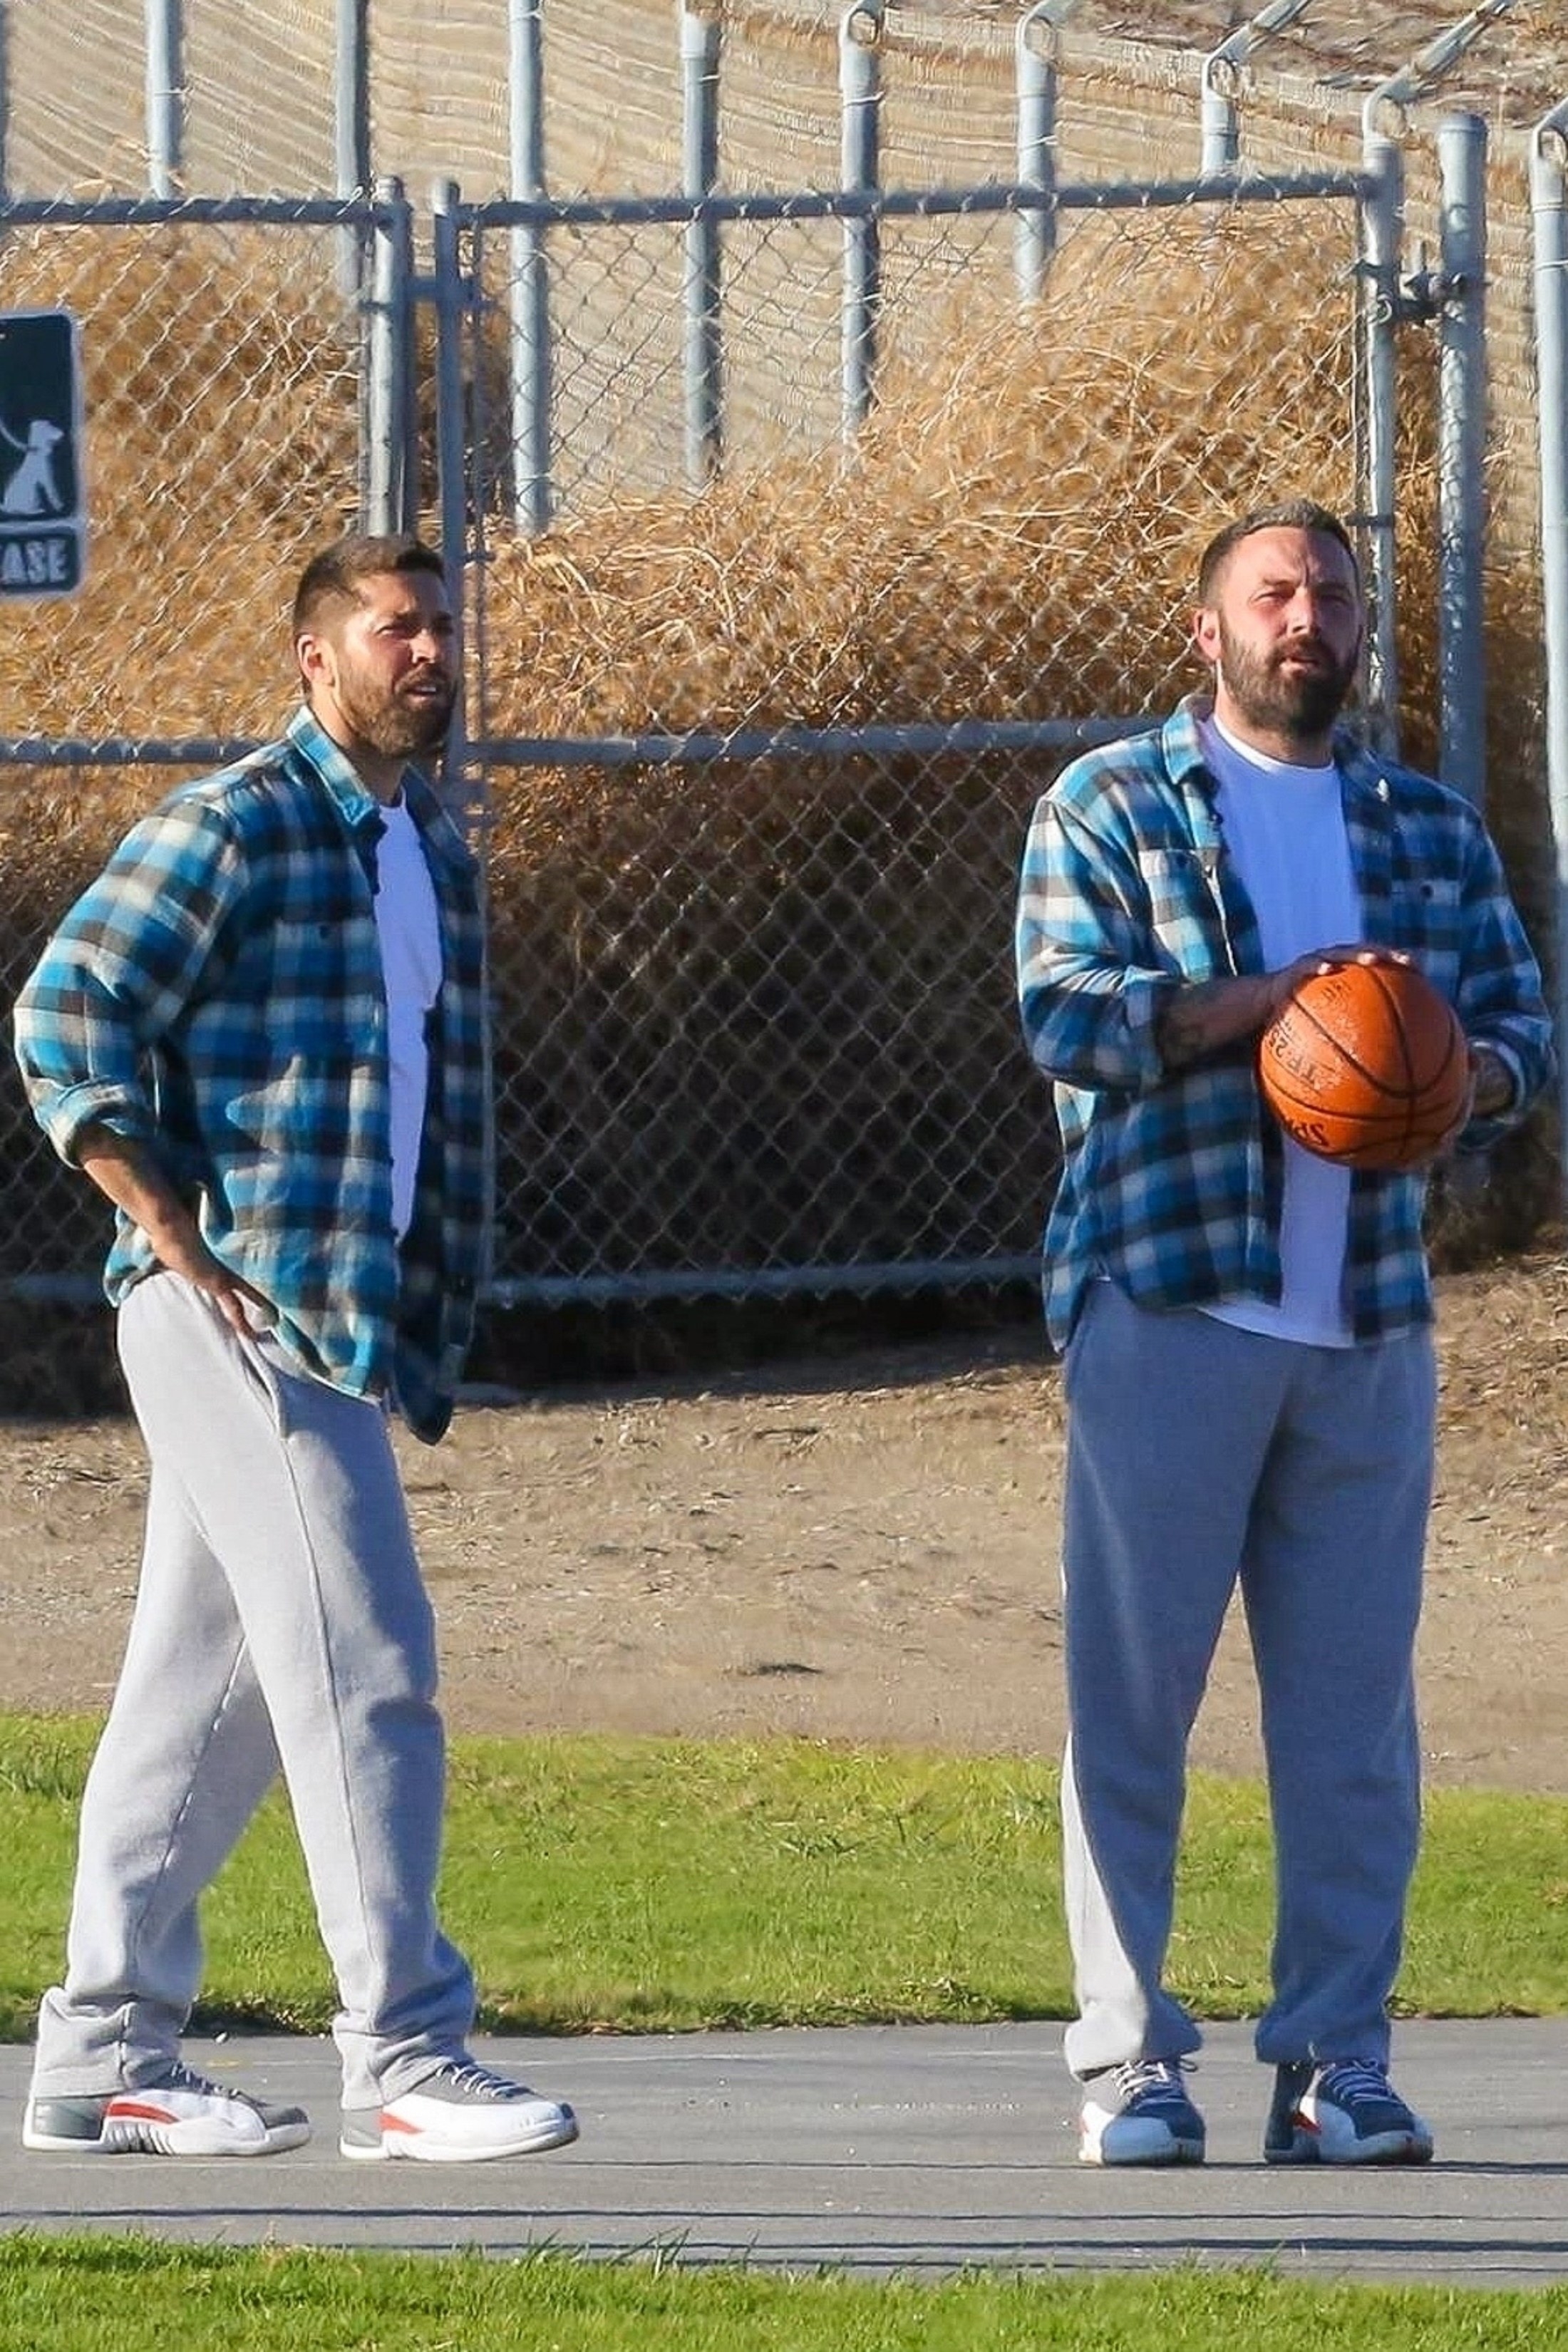 Ben holding a basketball and standing with his body double, both in sweatpants, plaid shirts, and sneakers